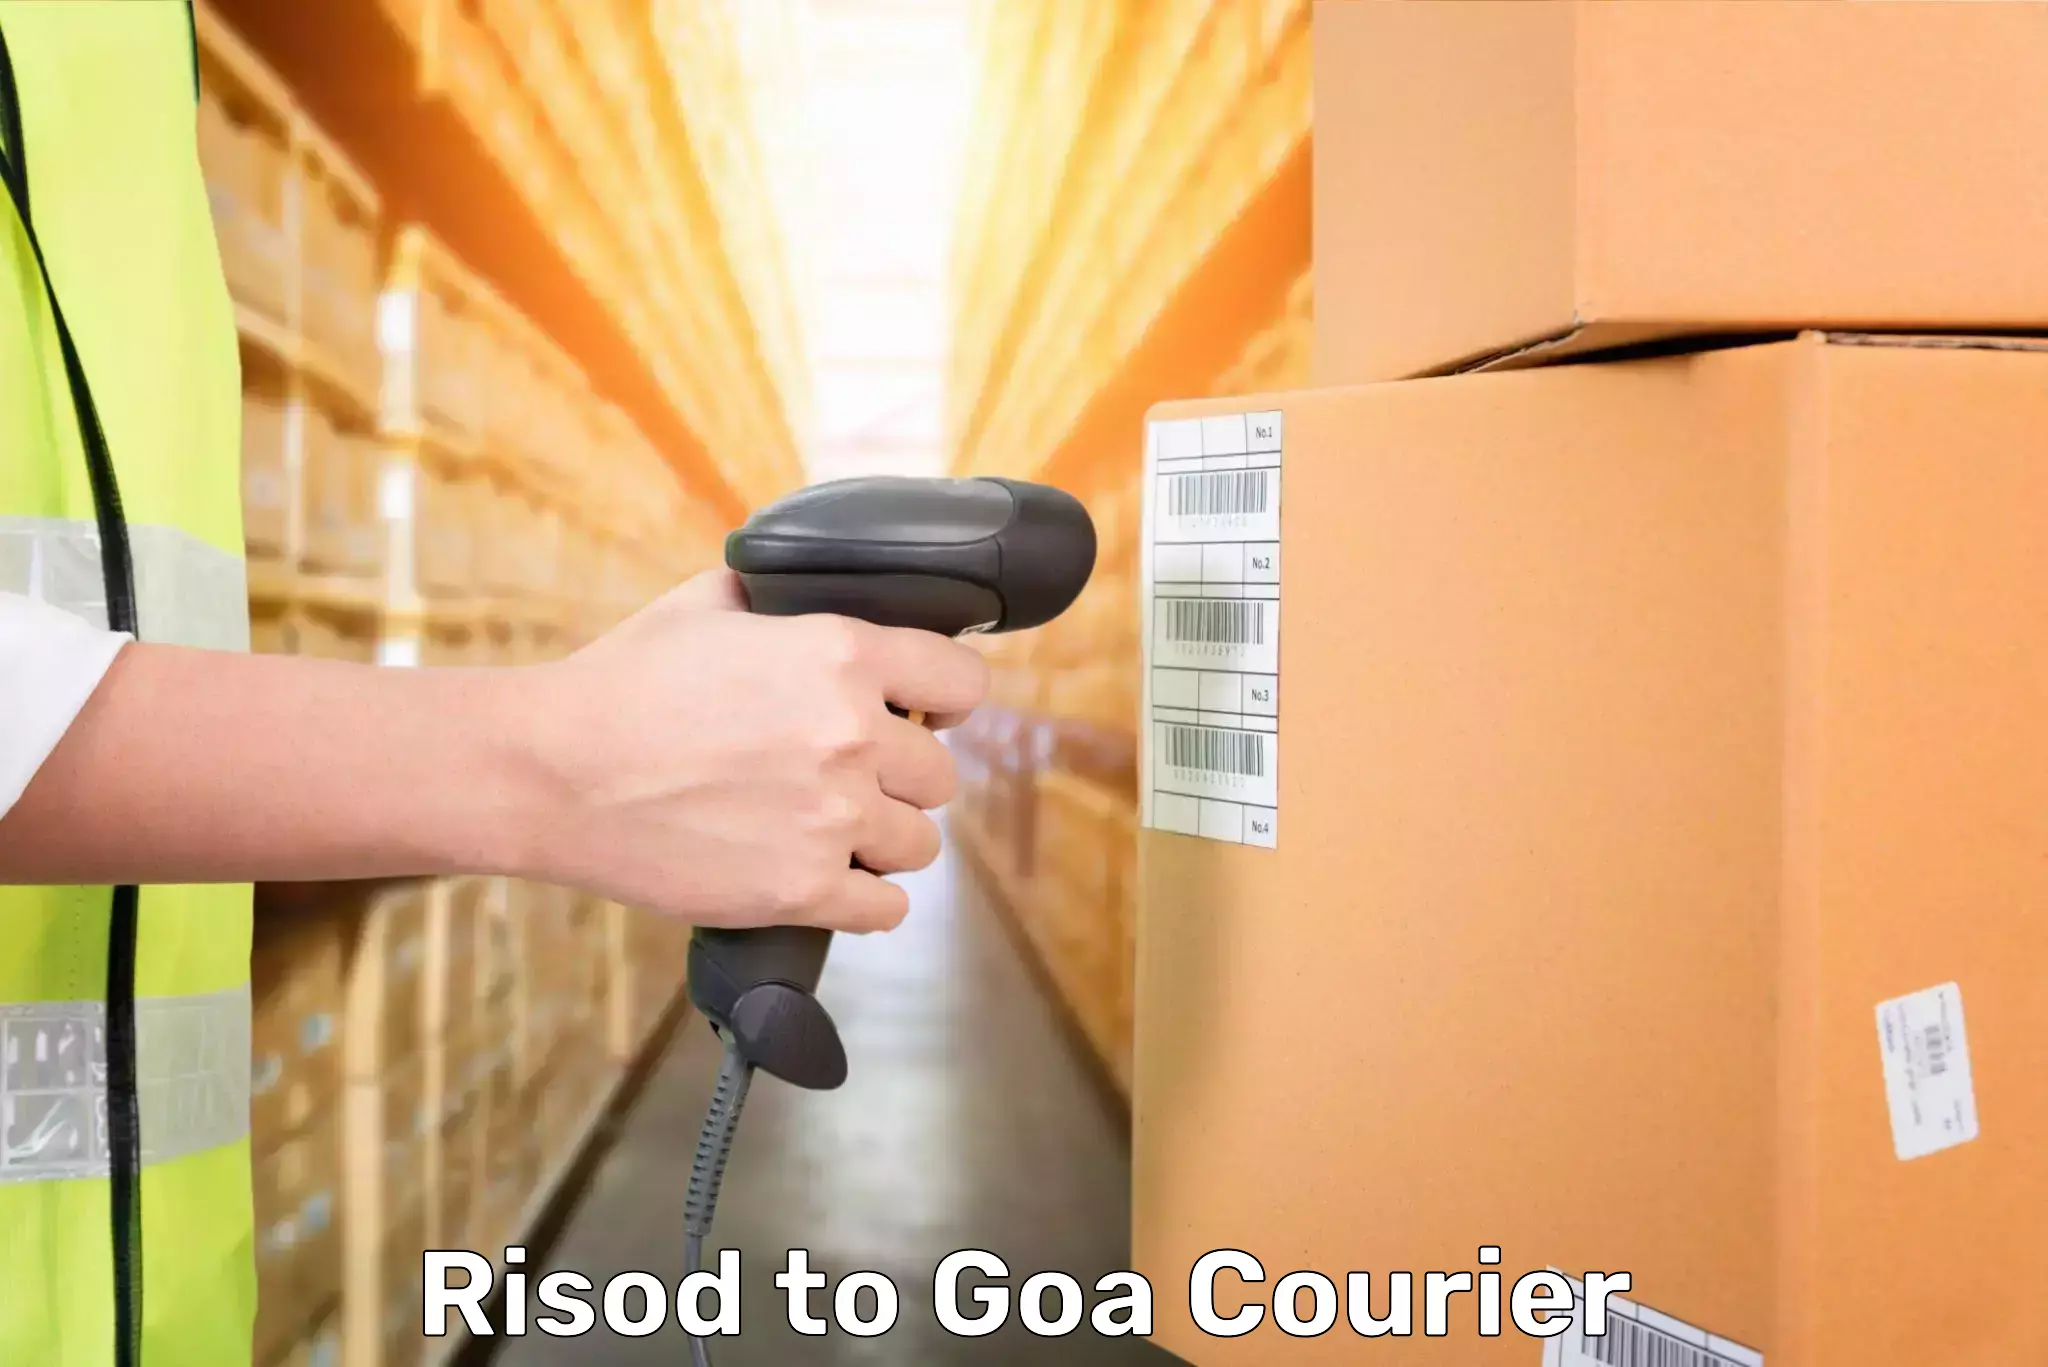 Same day luggage service in Risod to Goa